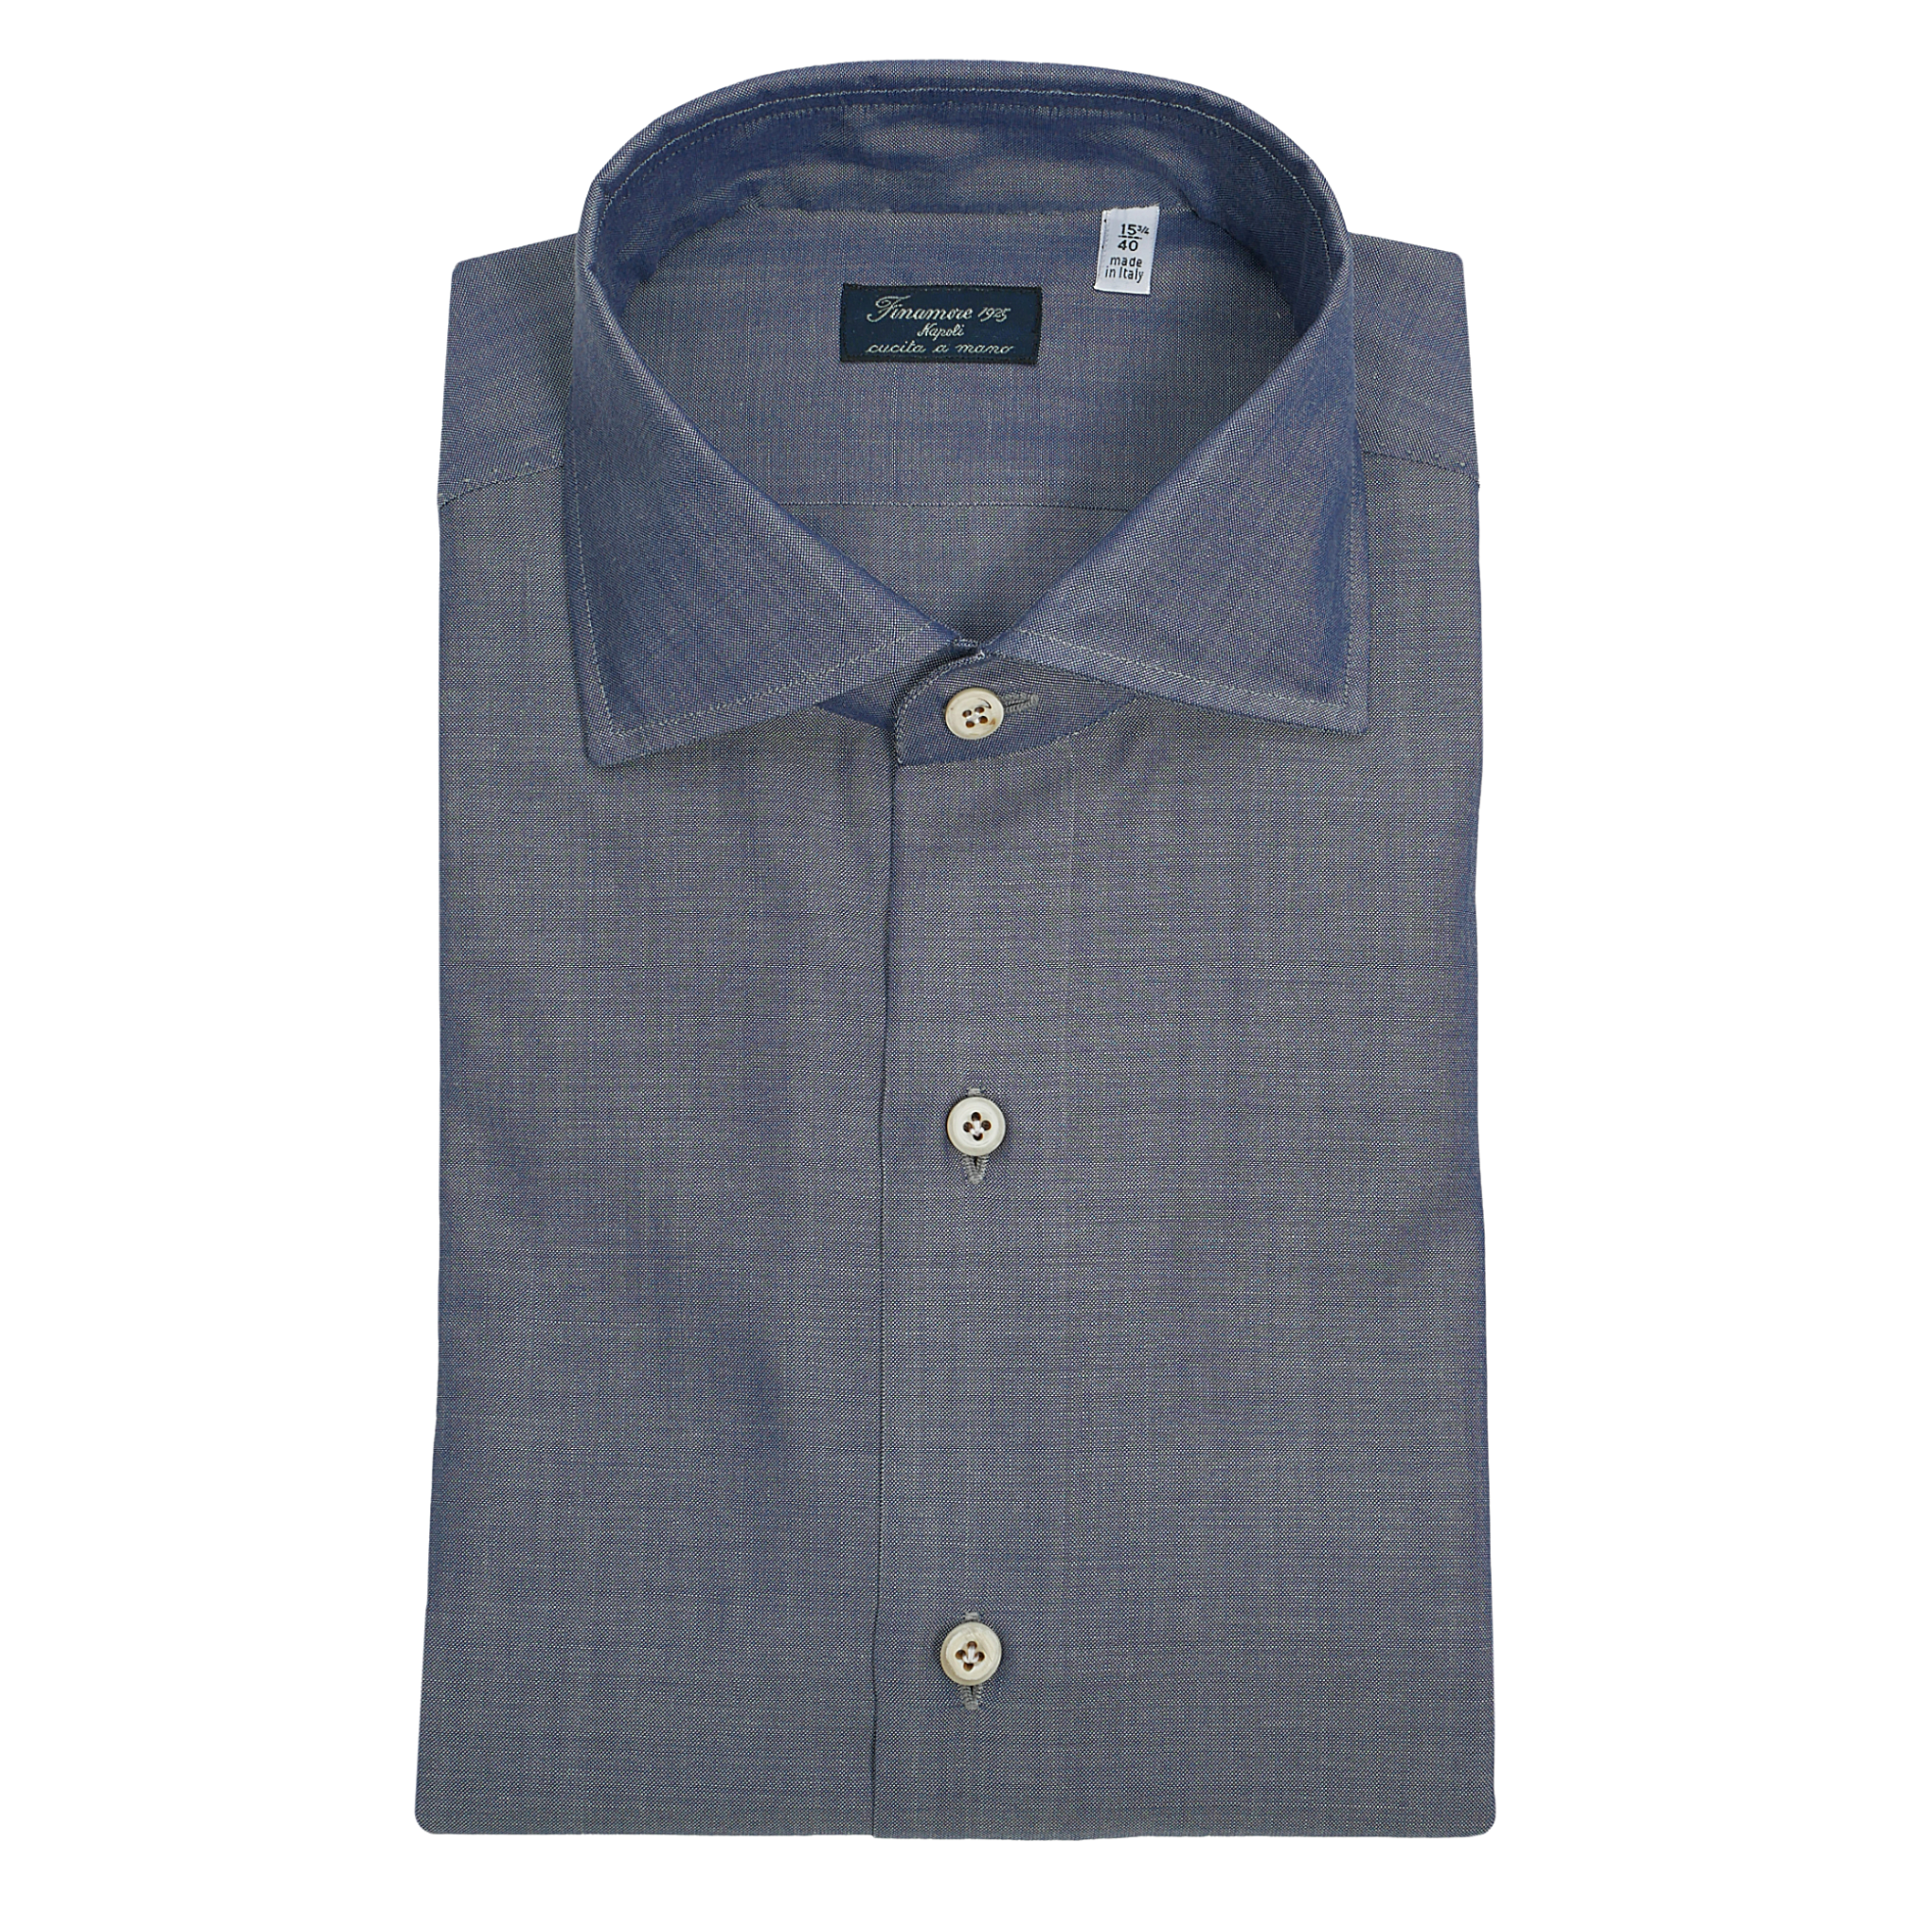 Napoli regular fit shirt plain fabric blue wool and cly. Finamore 1925